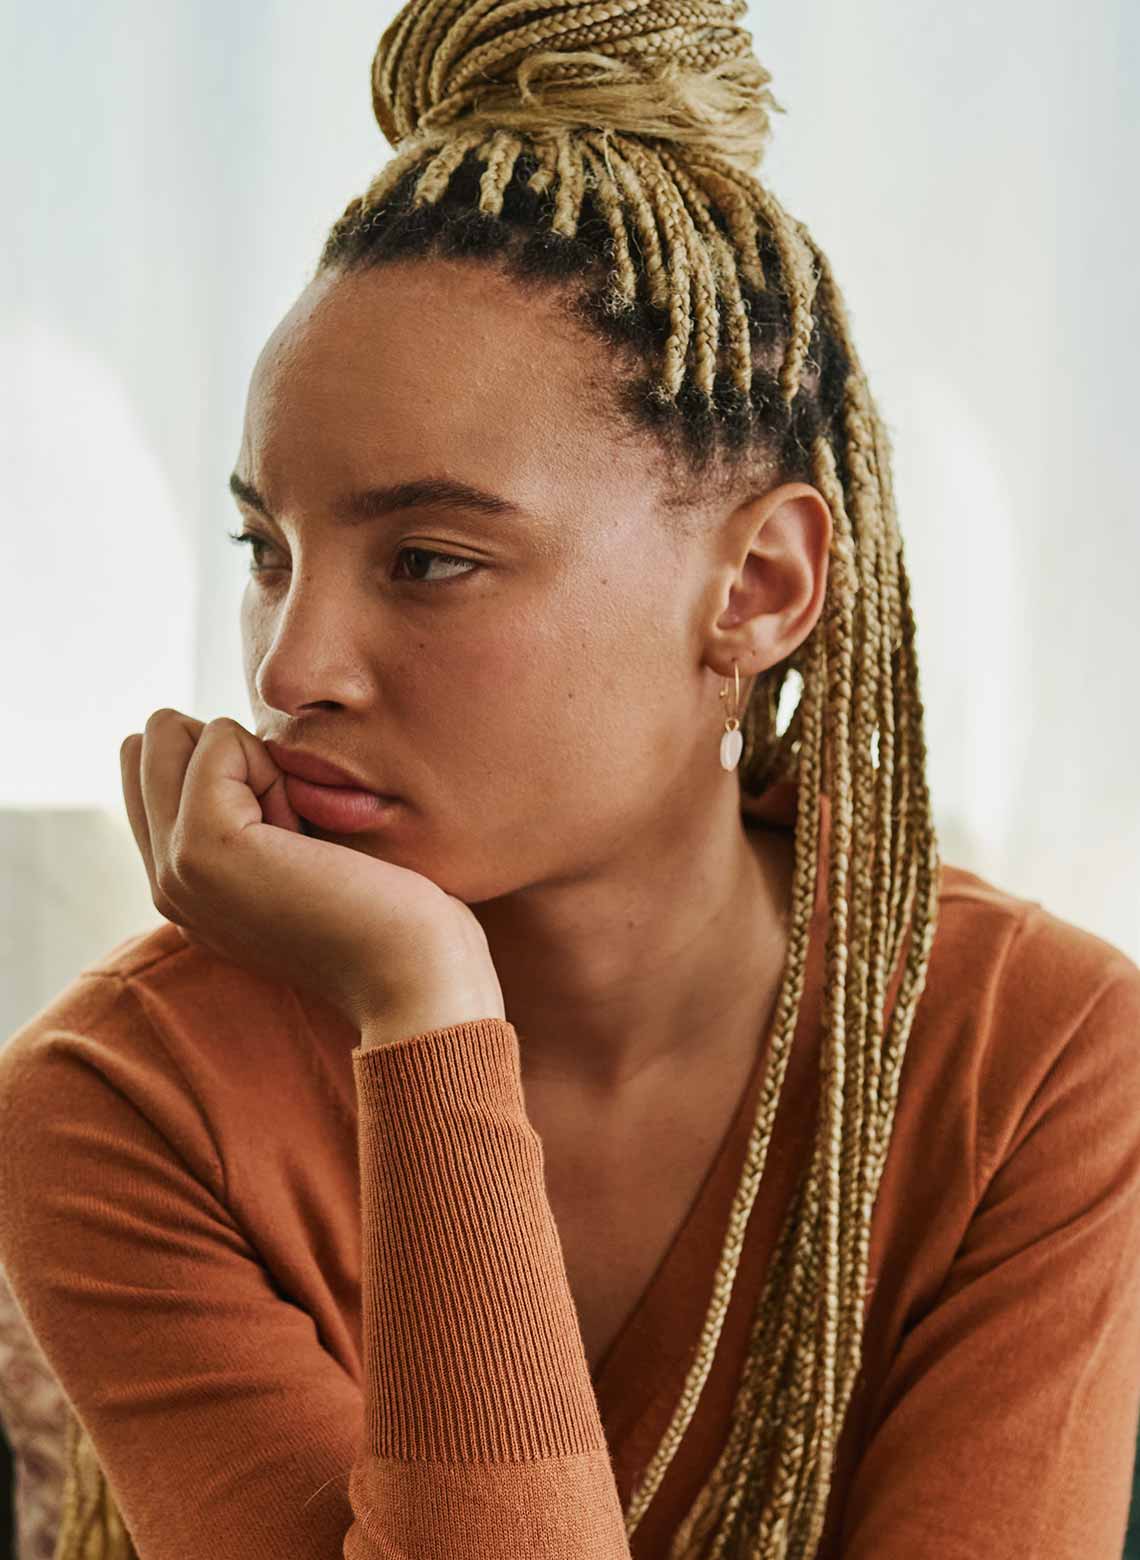 person wearing burnt orange long-sleeve shirt, half-up, half-down blonde knotless braids, with hand on their chin and looking to the side